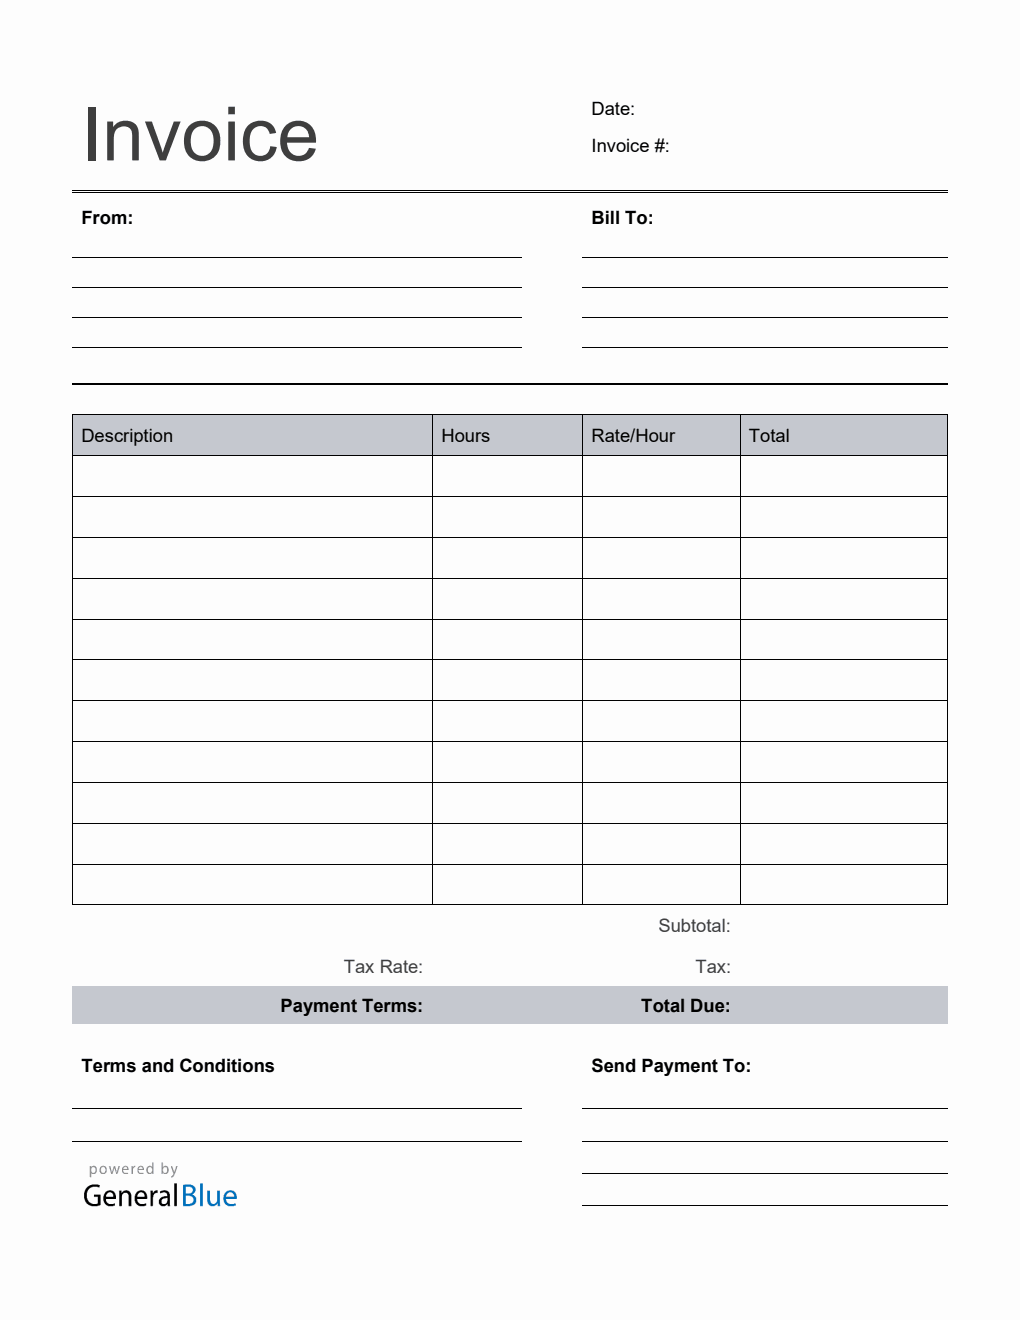 Freelance Hourly Invoice with Tax Calculation in PDF (Basic)